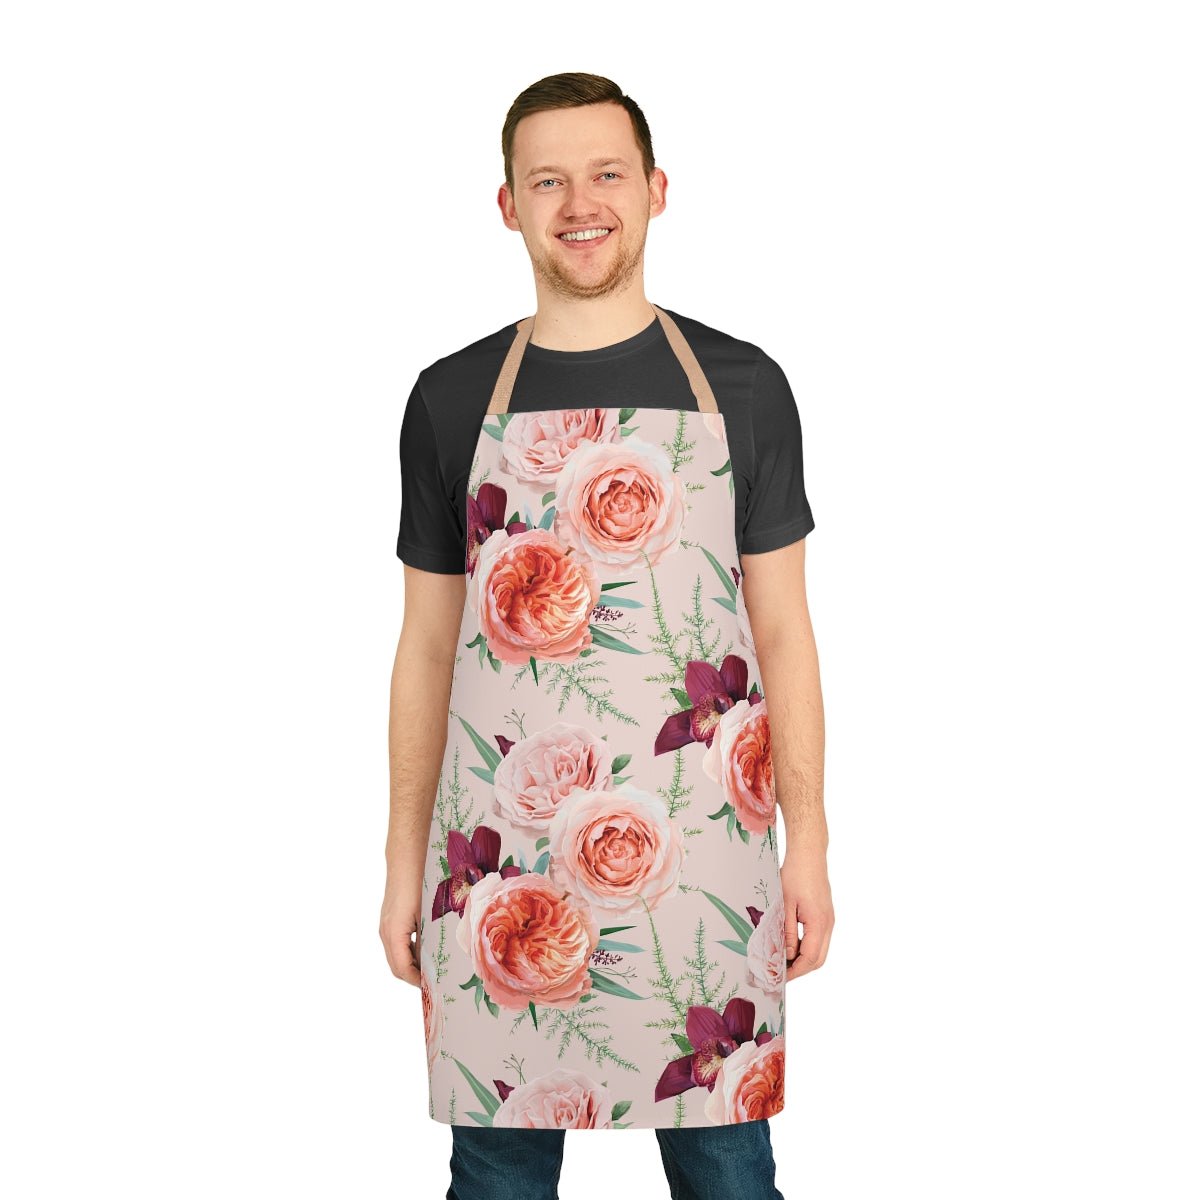 Blush Roses Apron - Puffin Lime